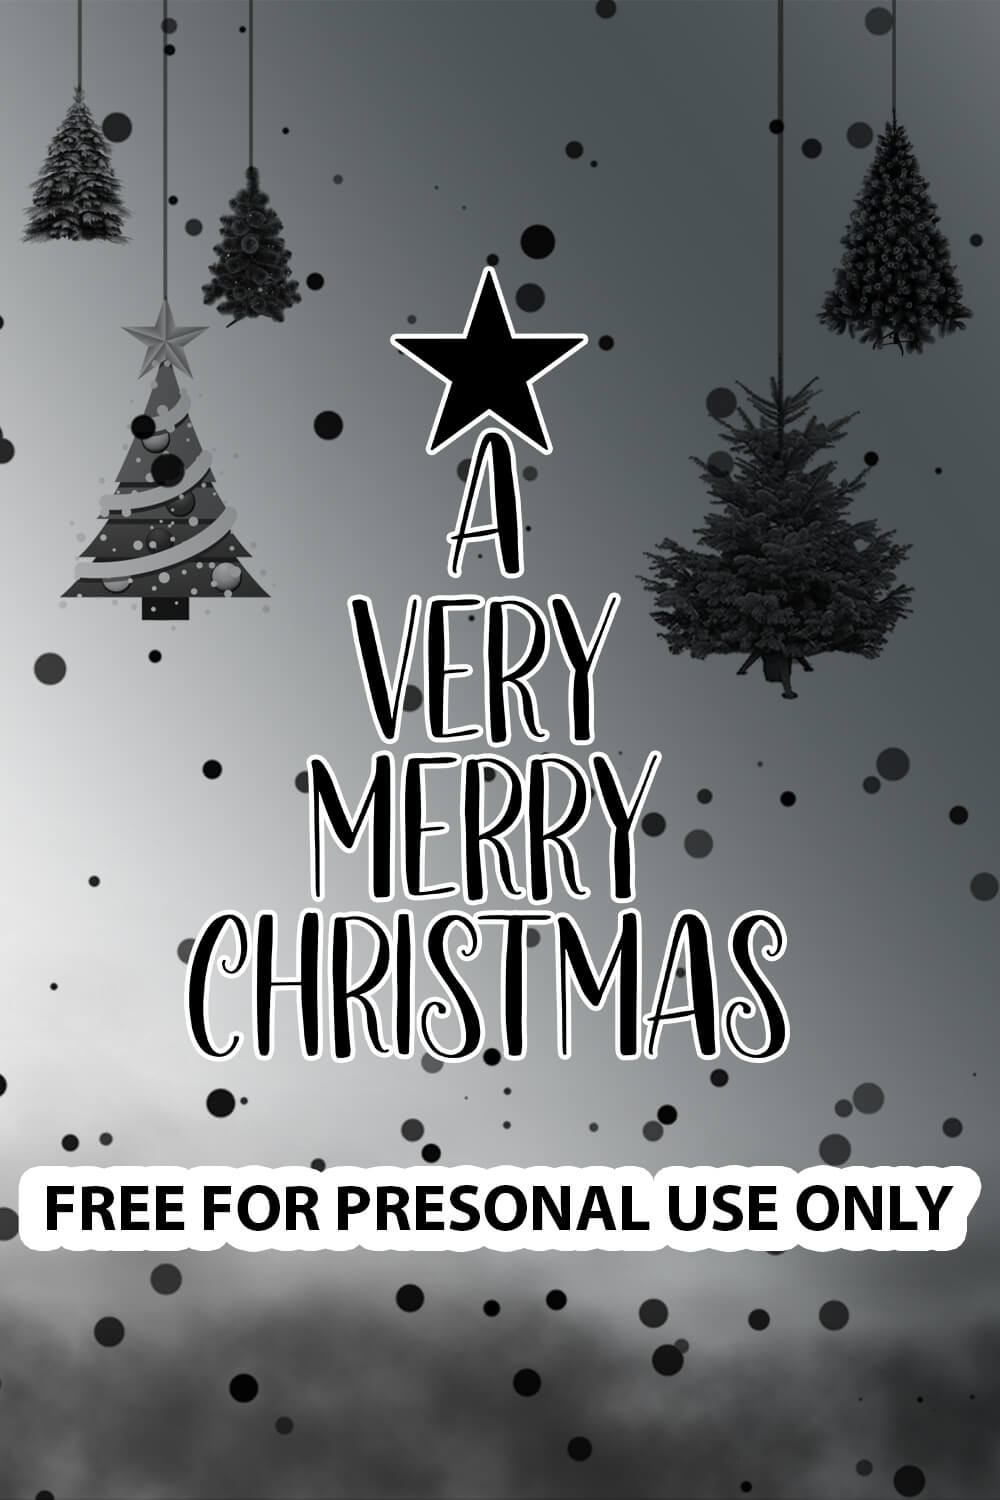 A Very Merry Christmas FREE SVG Files 1489 pinterest image.